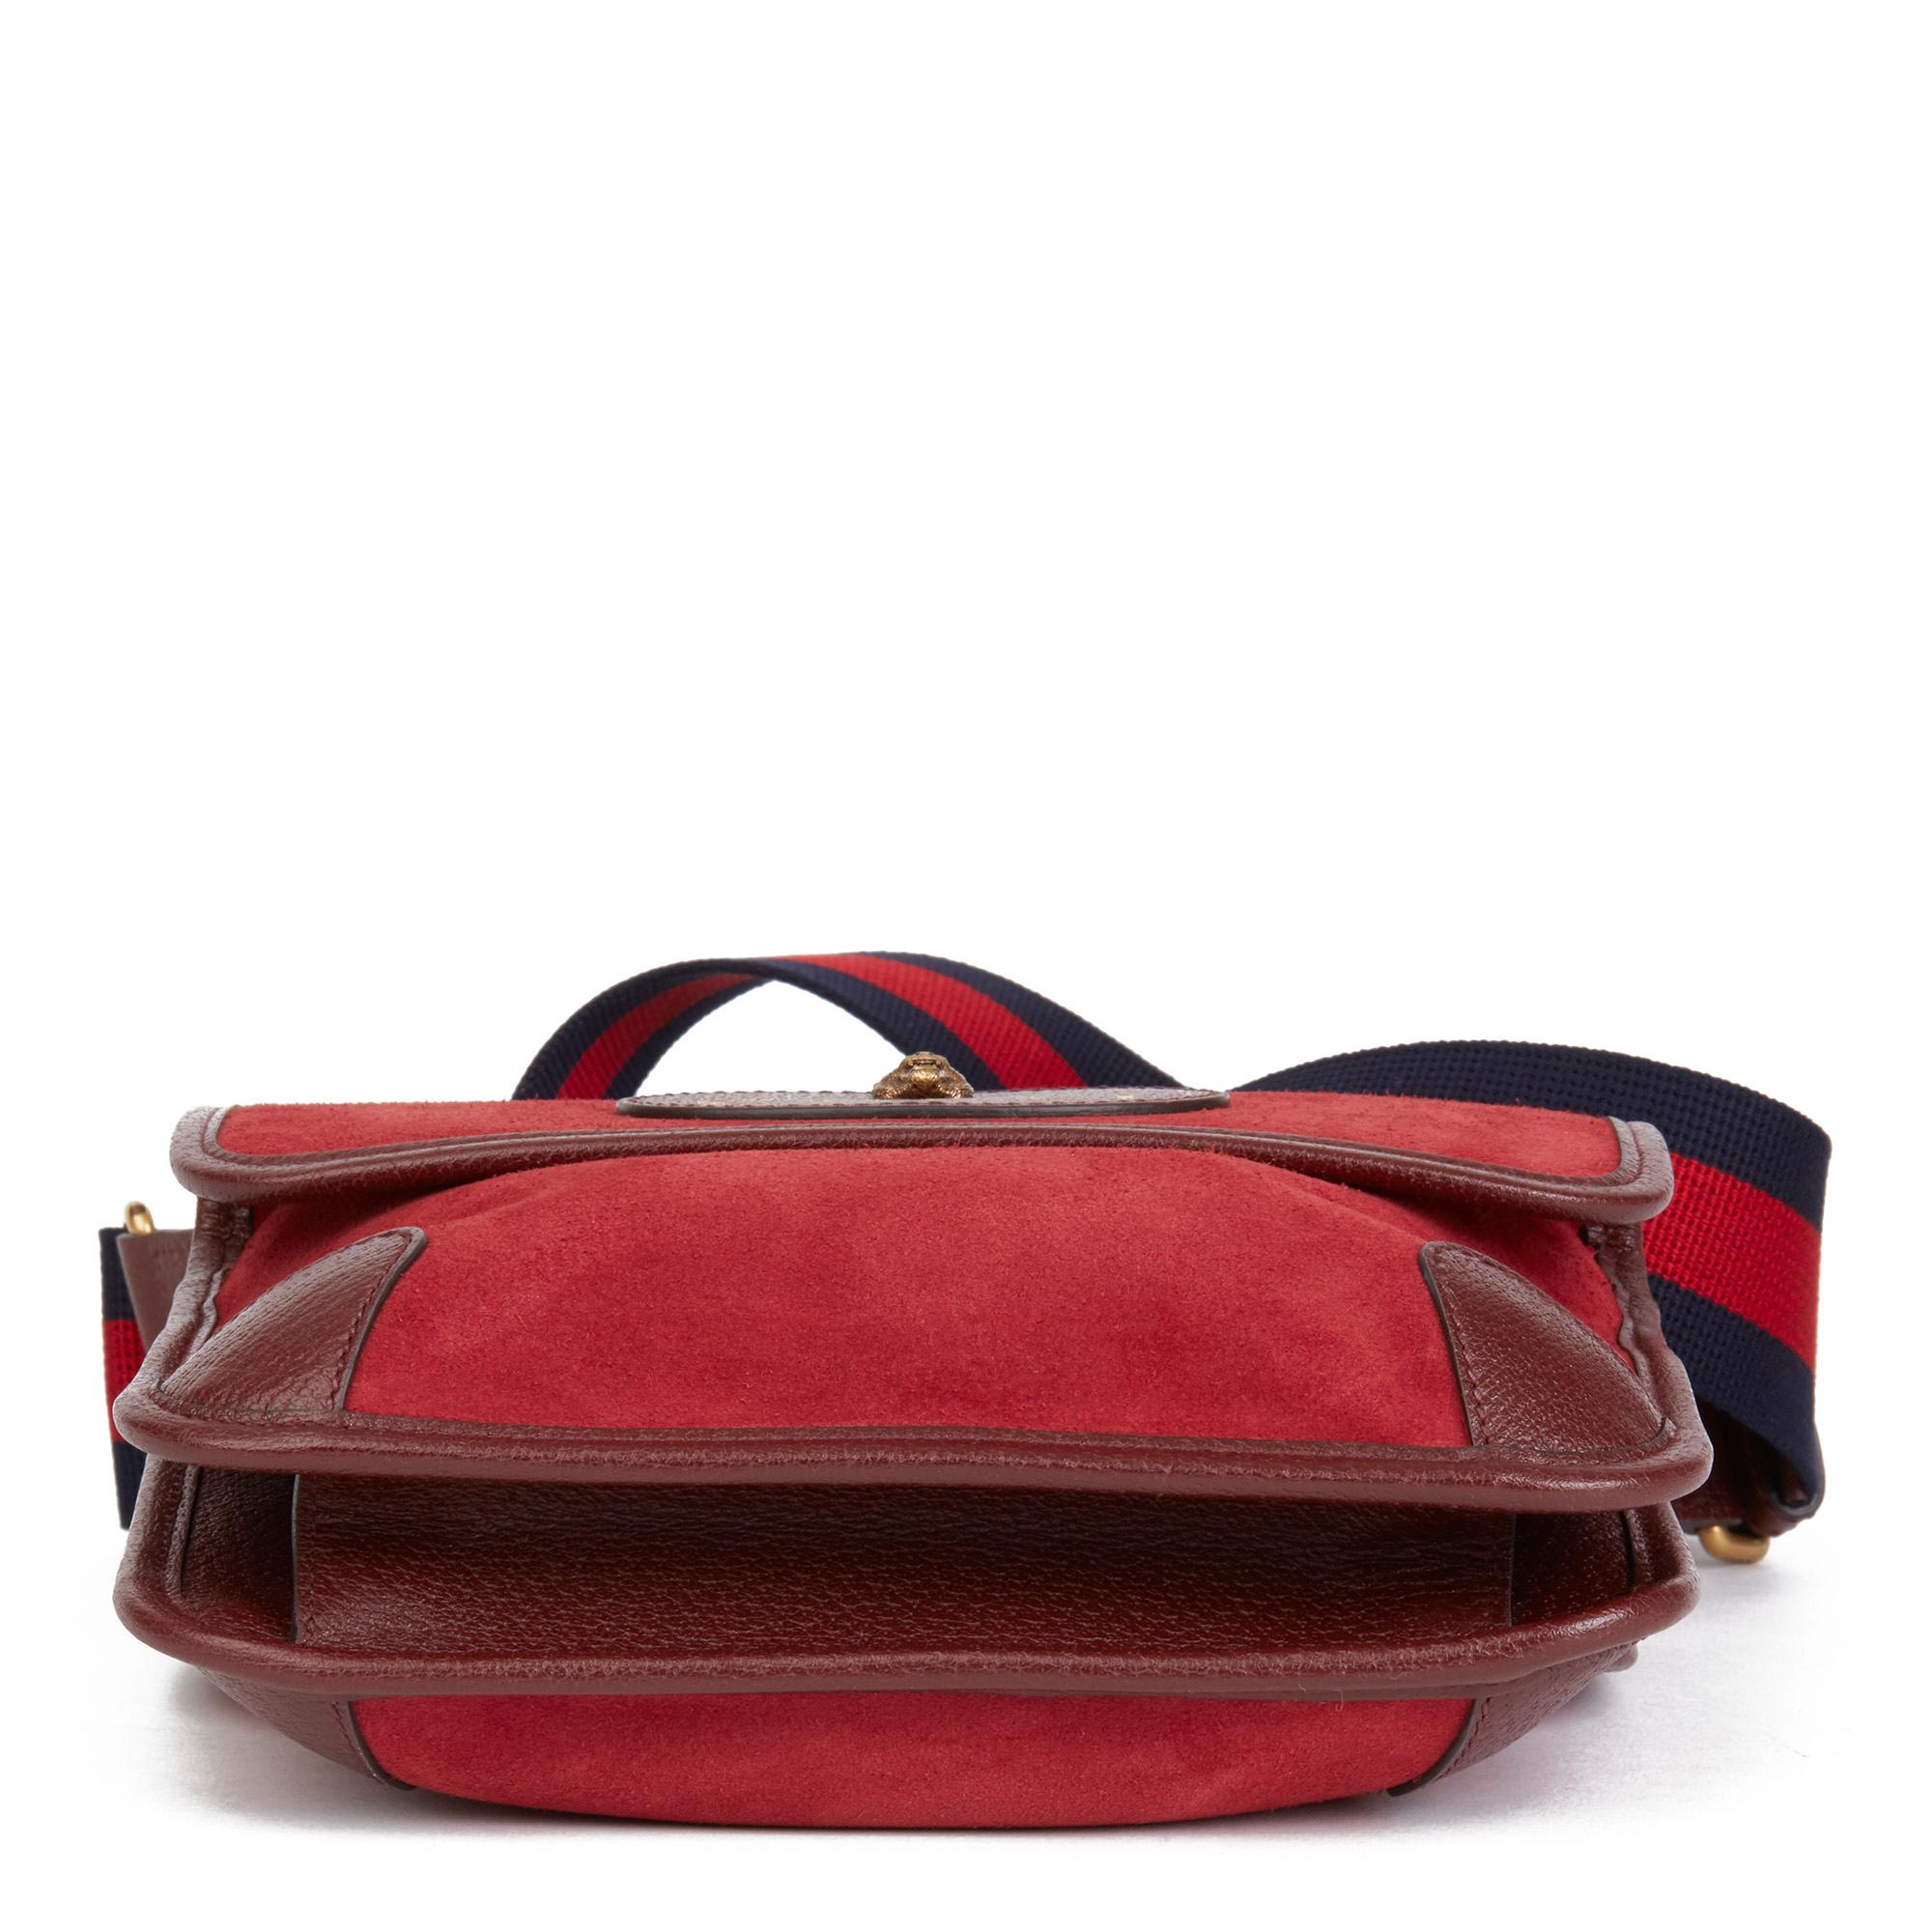 2020 Gucci Red Suede & Burgundy Pigskin, Navy Web Small Messenger Bag 1